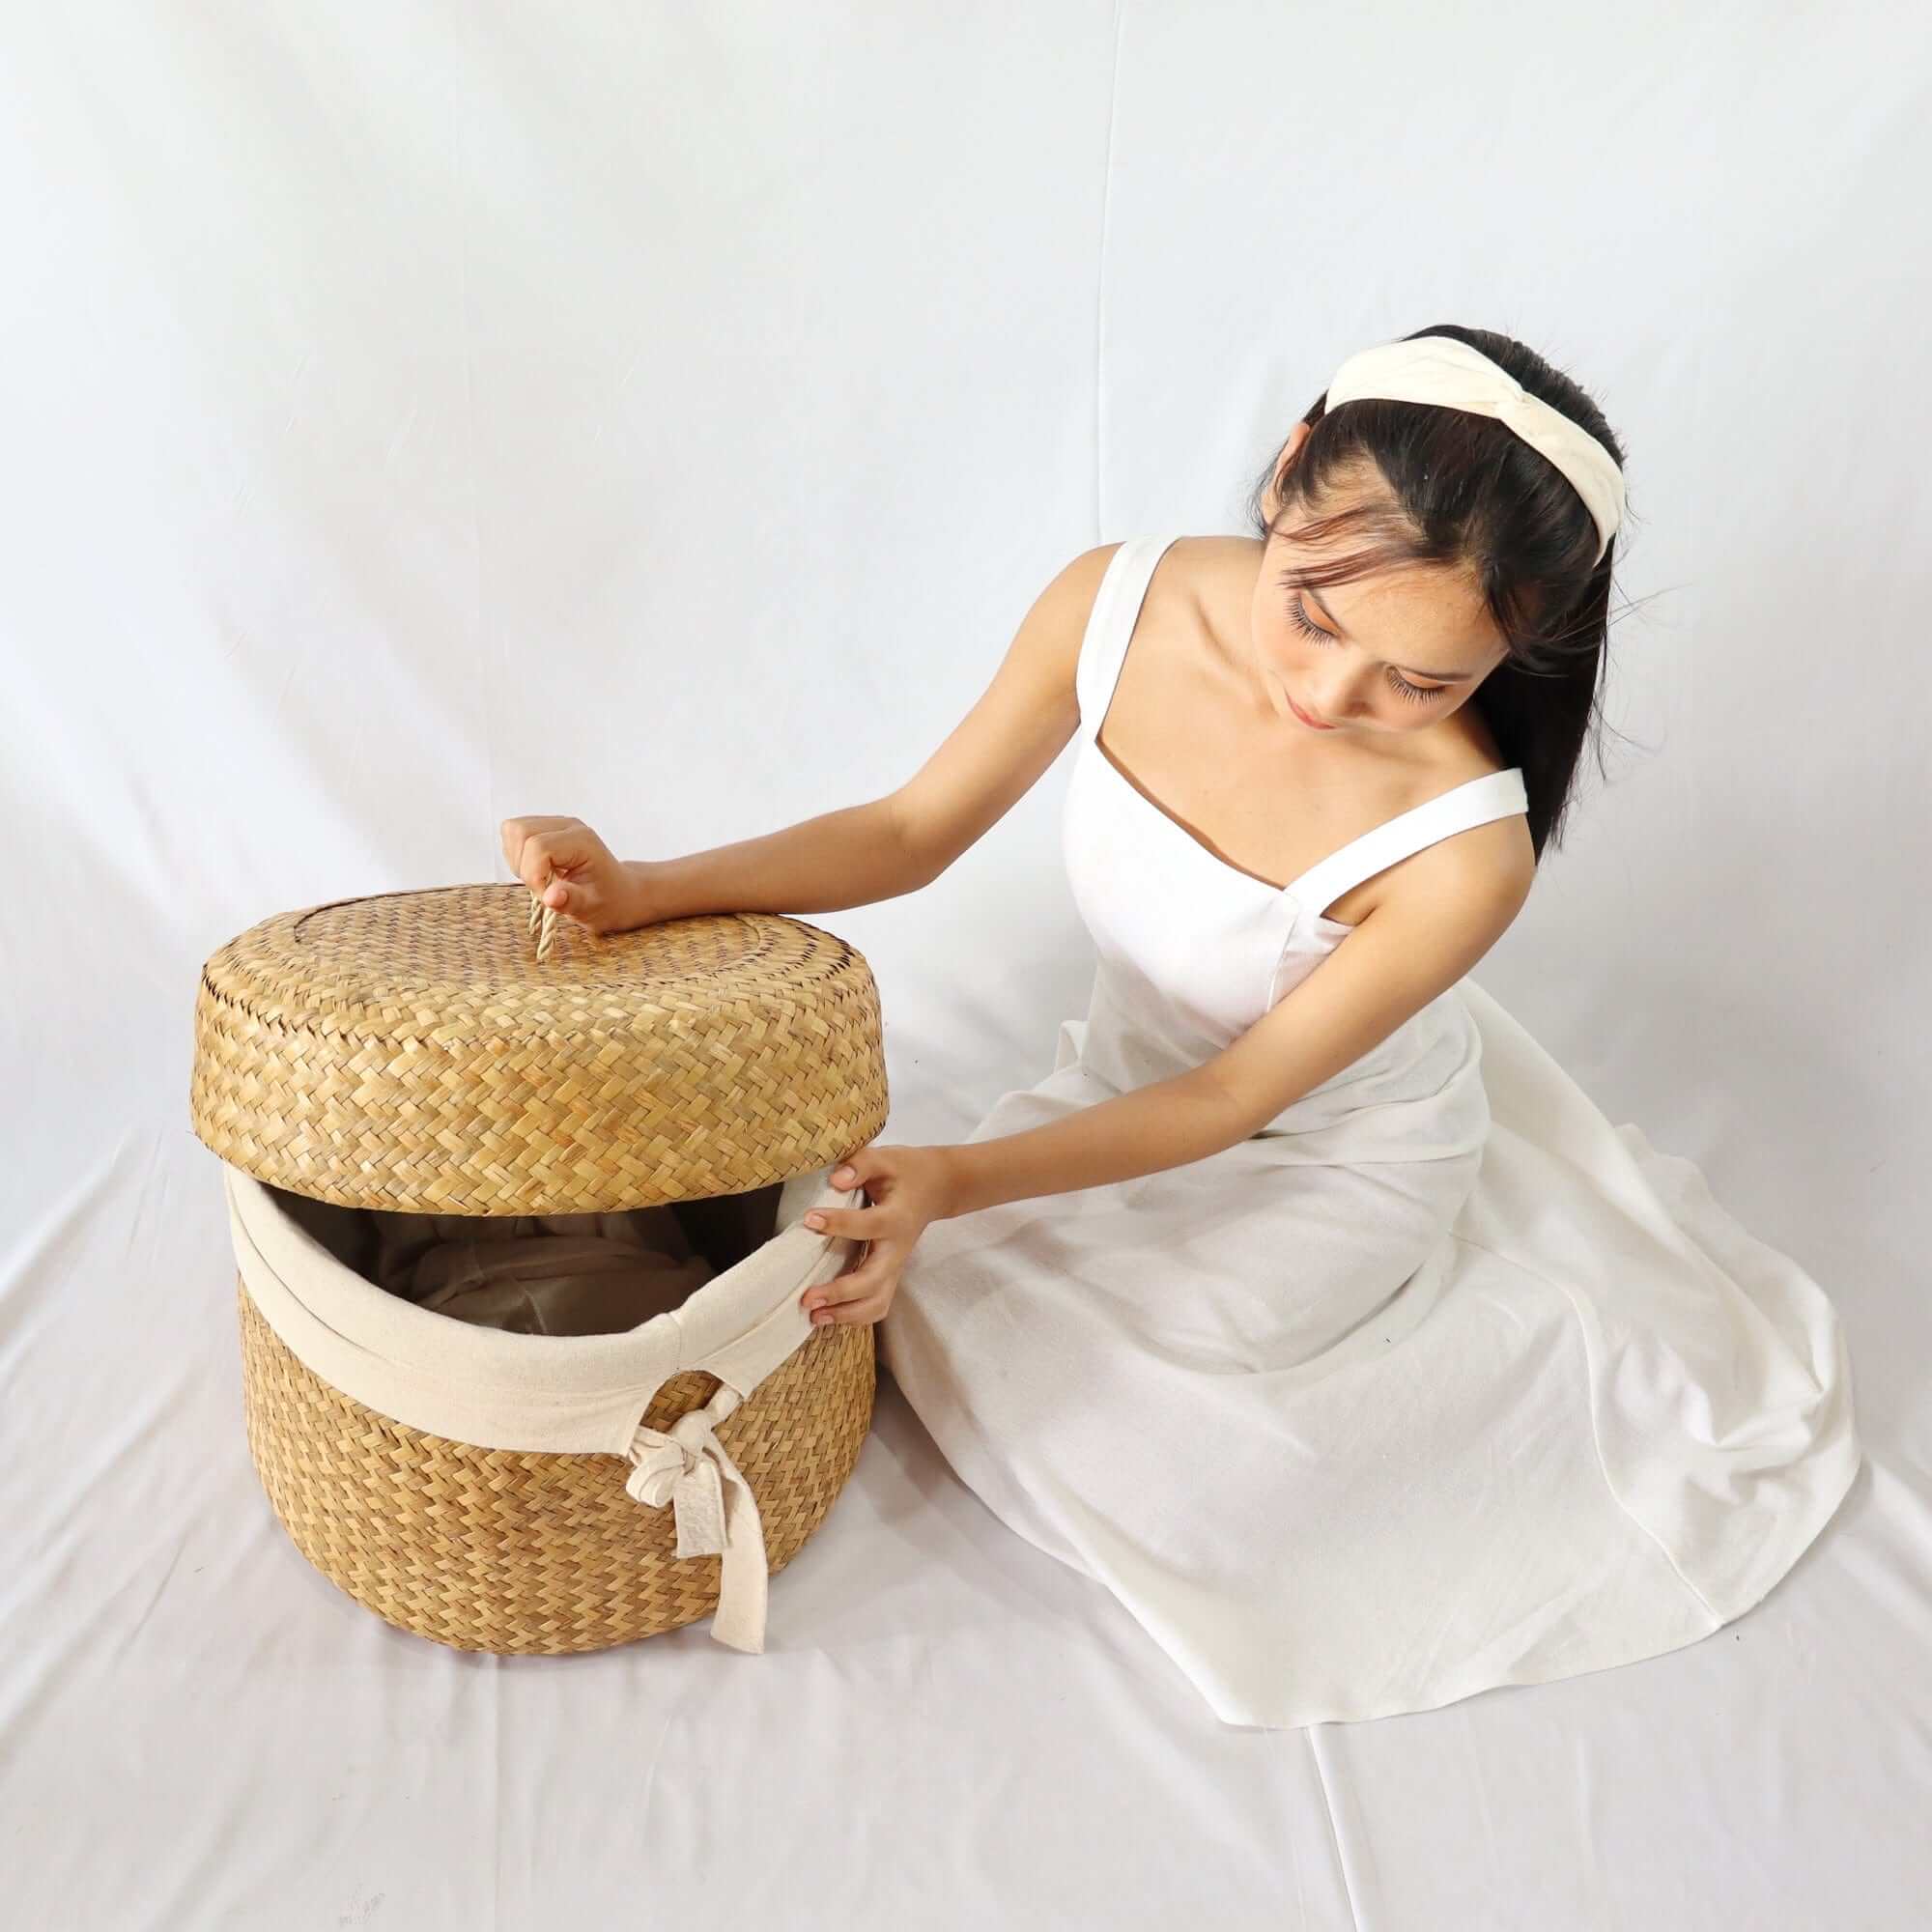 KAN DA Handwoven Laundry Basket With Handles and a Lid